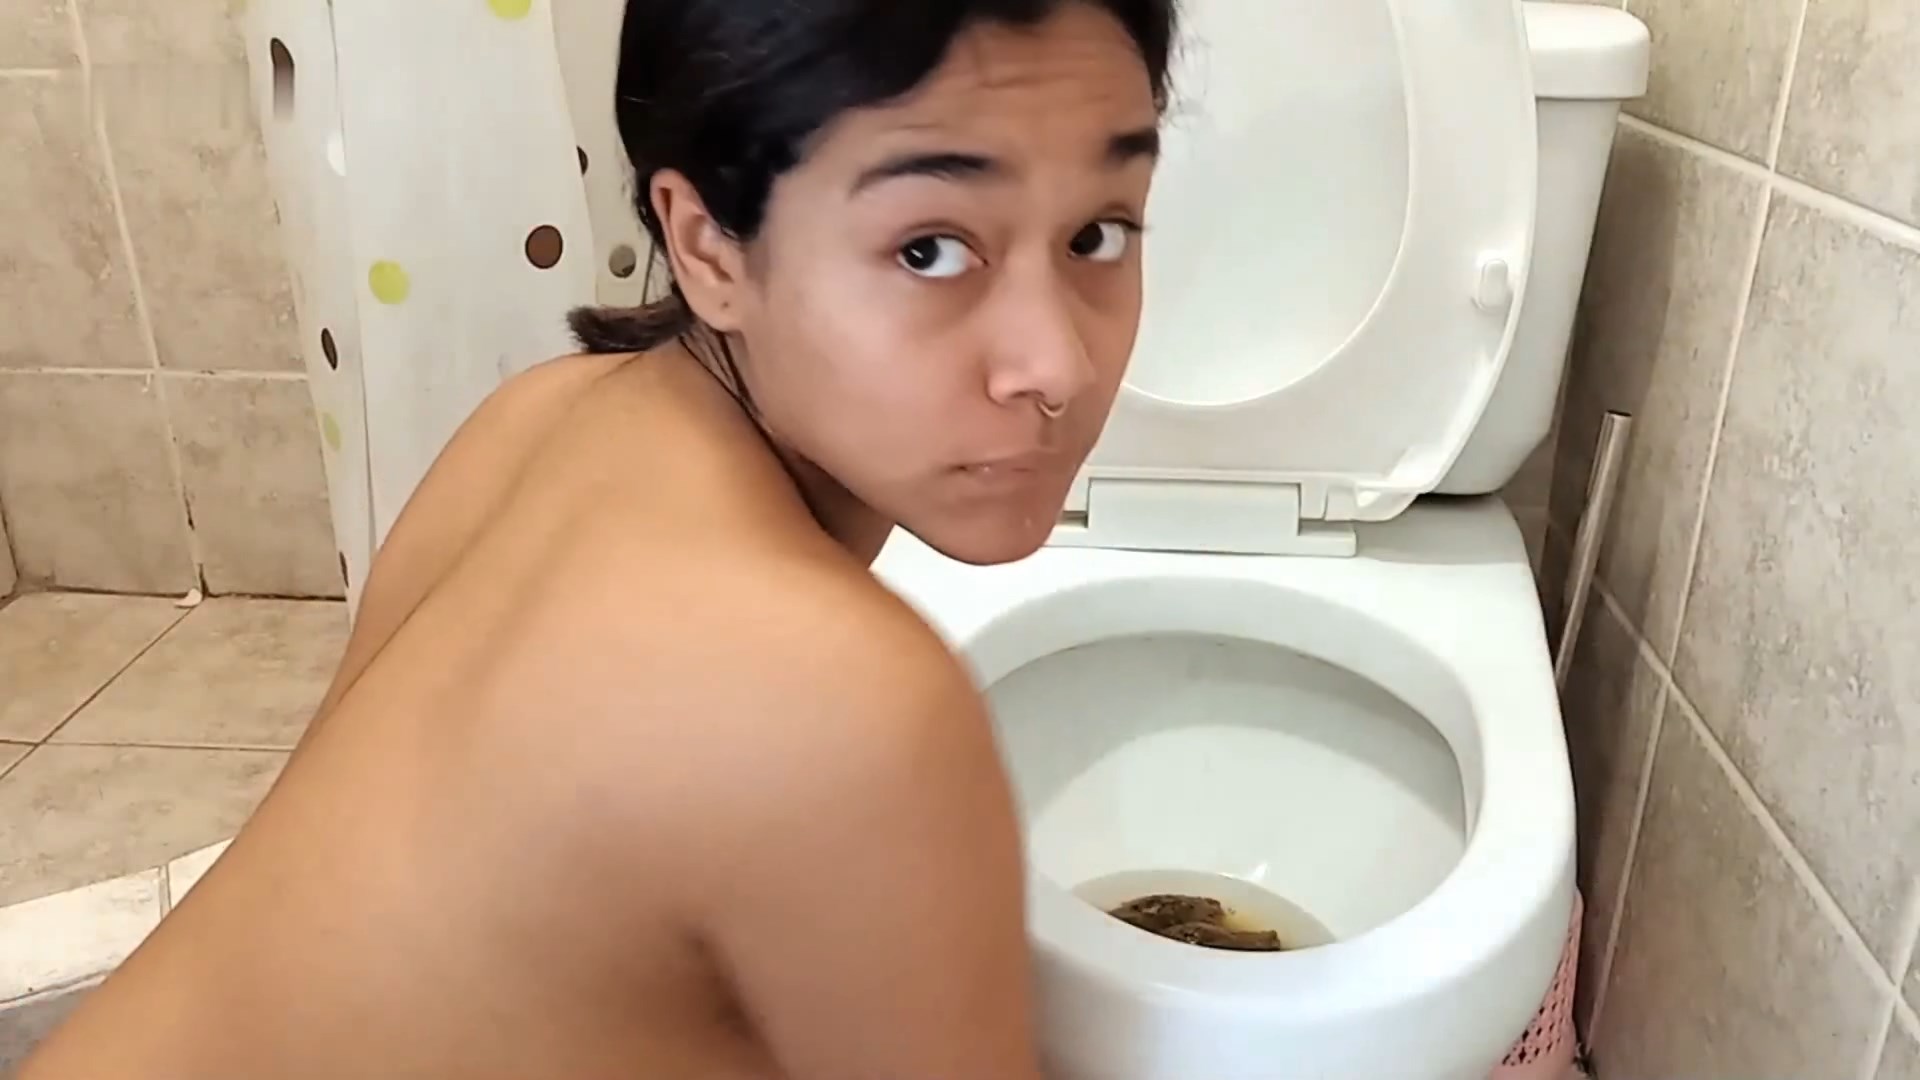 Eat The Potty Sex - Eating my dirty toilet, after pooing (Special scat porn request from our  premium user) $28.99 by Mirellabb from 11 - Extreme Scat Porn Site #1